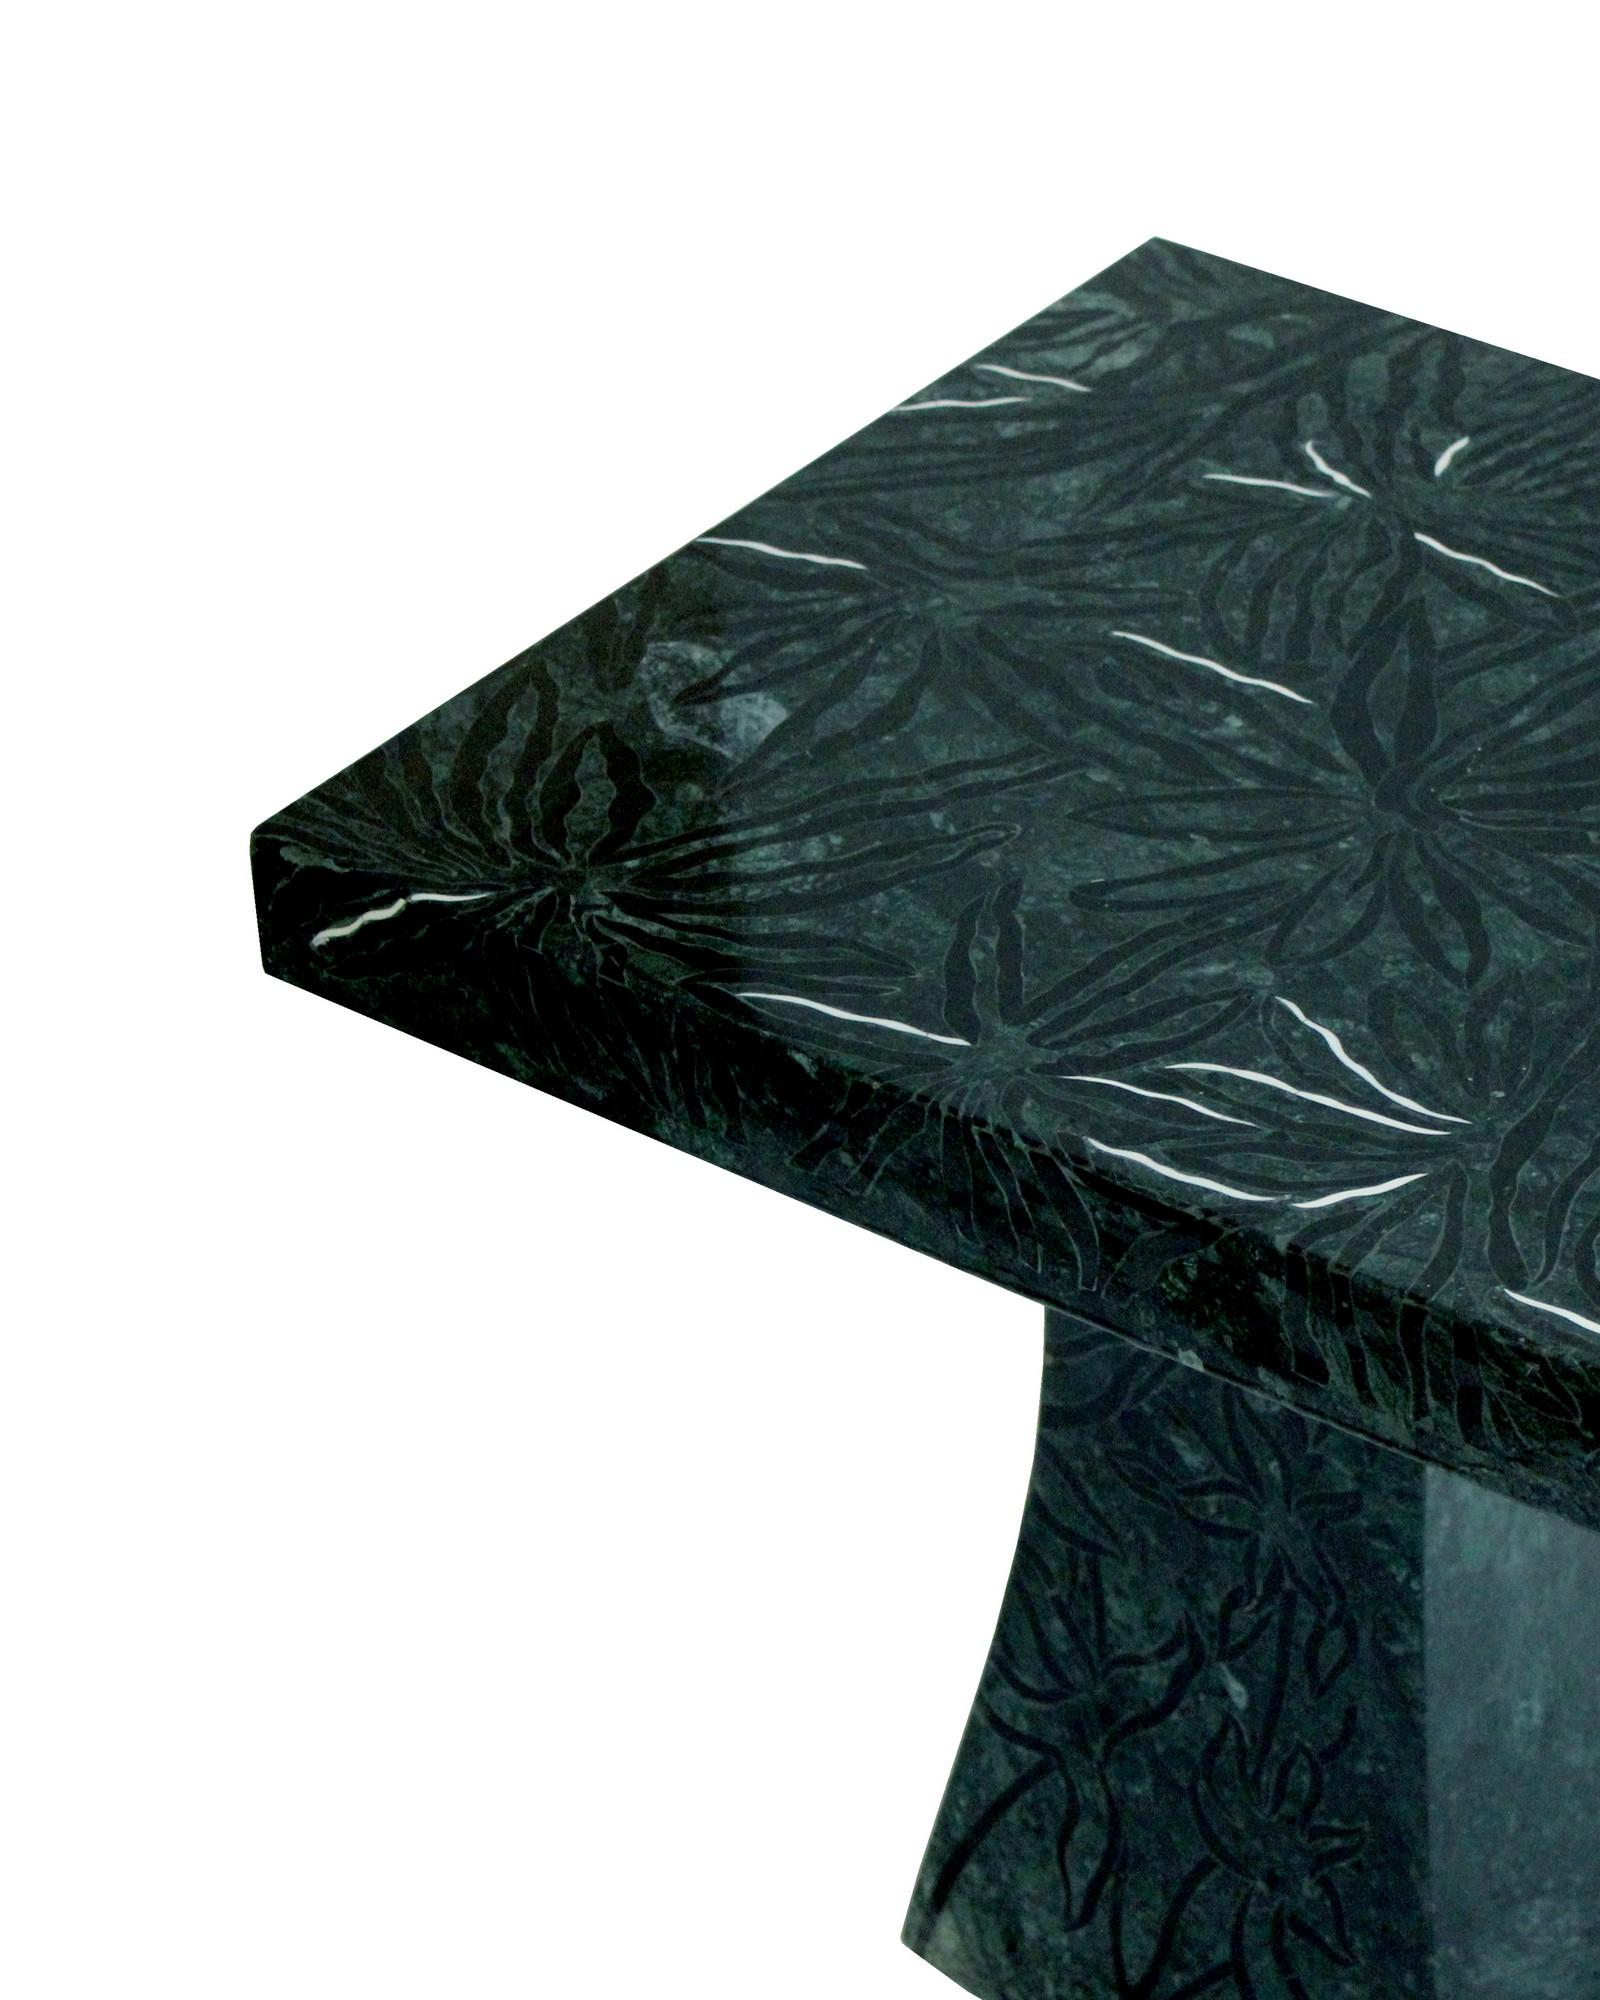 handcrafted in india marble top